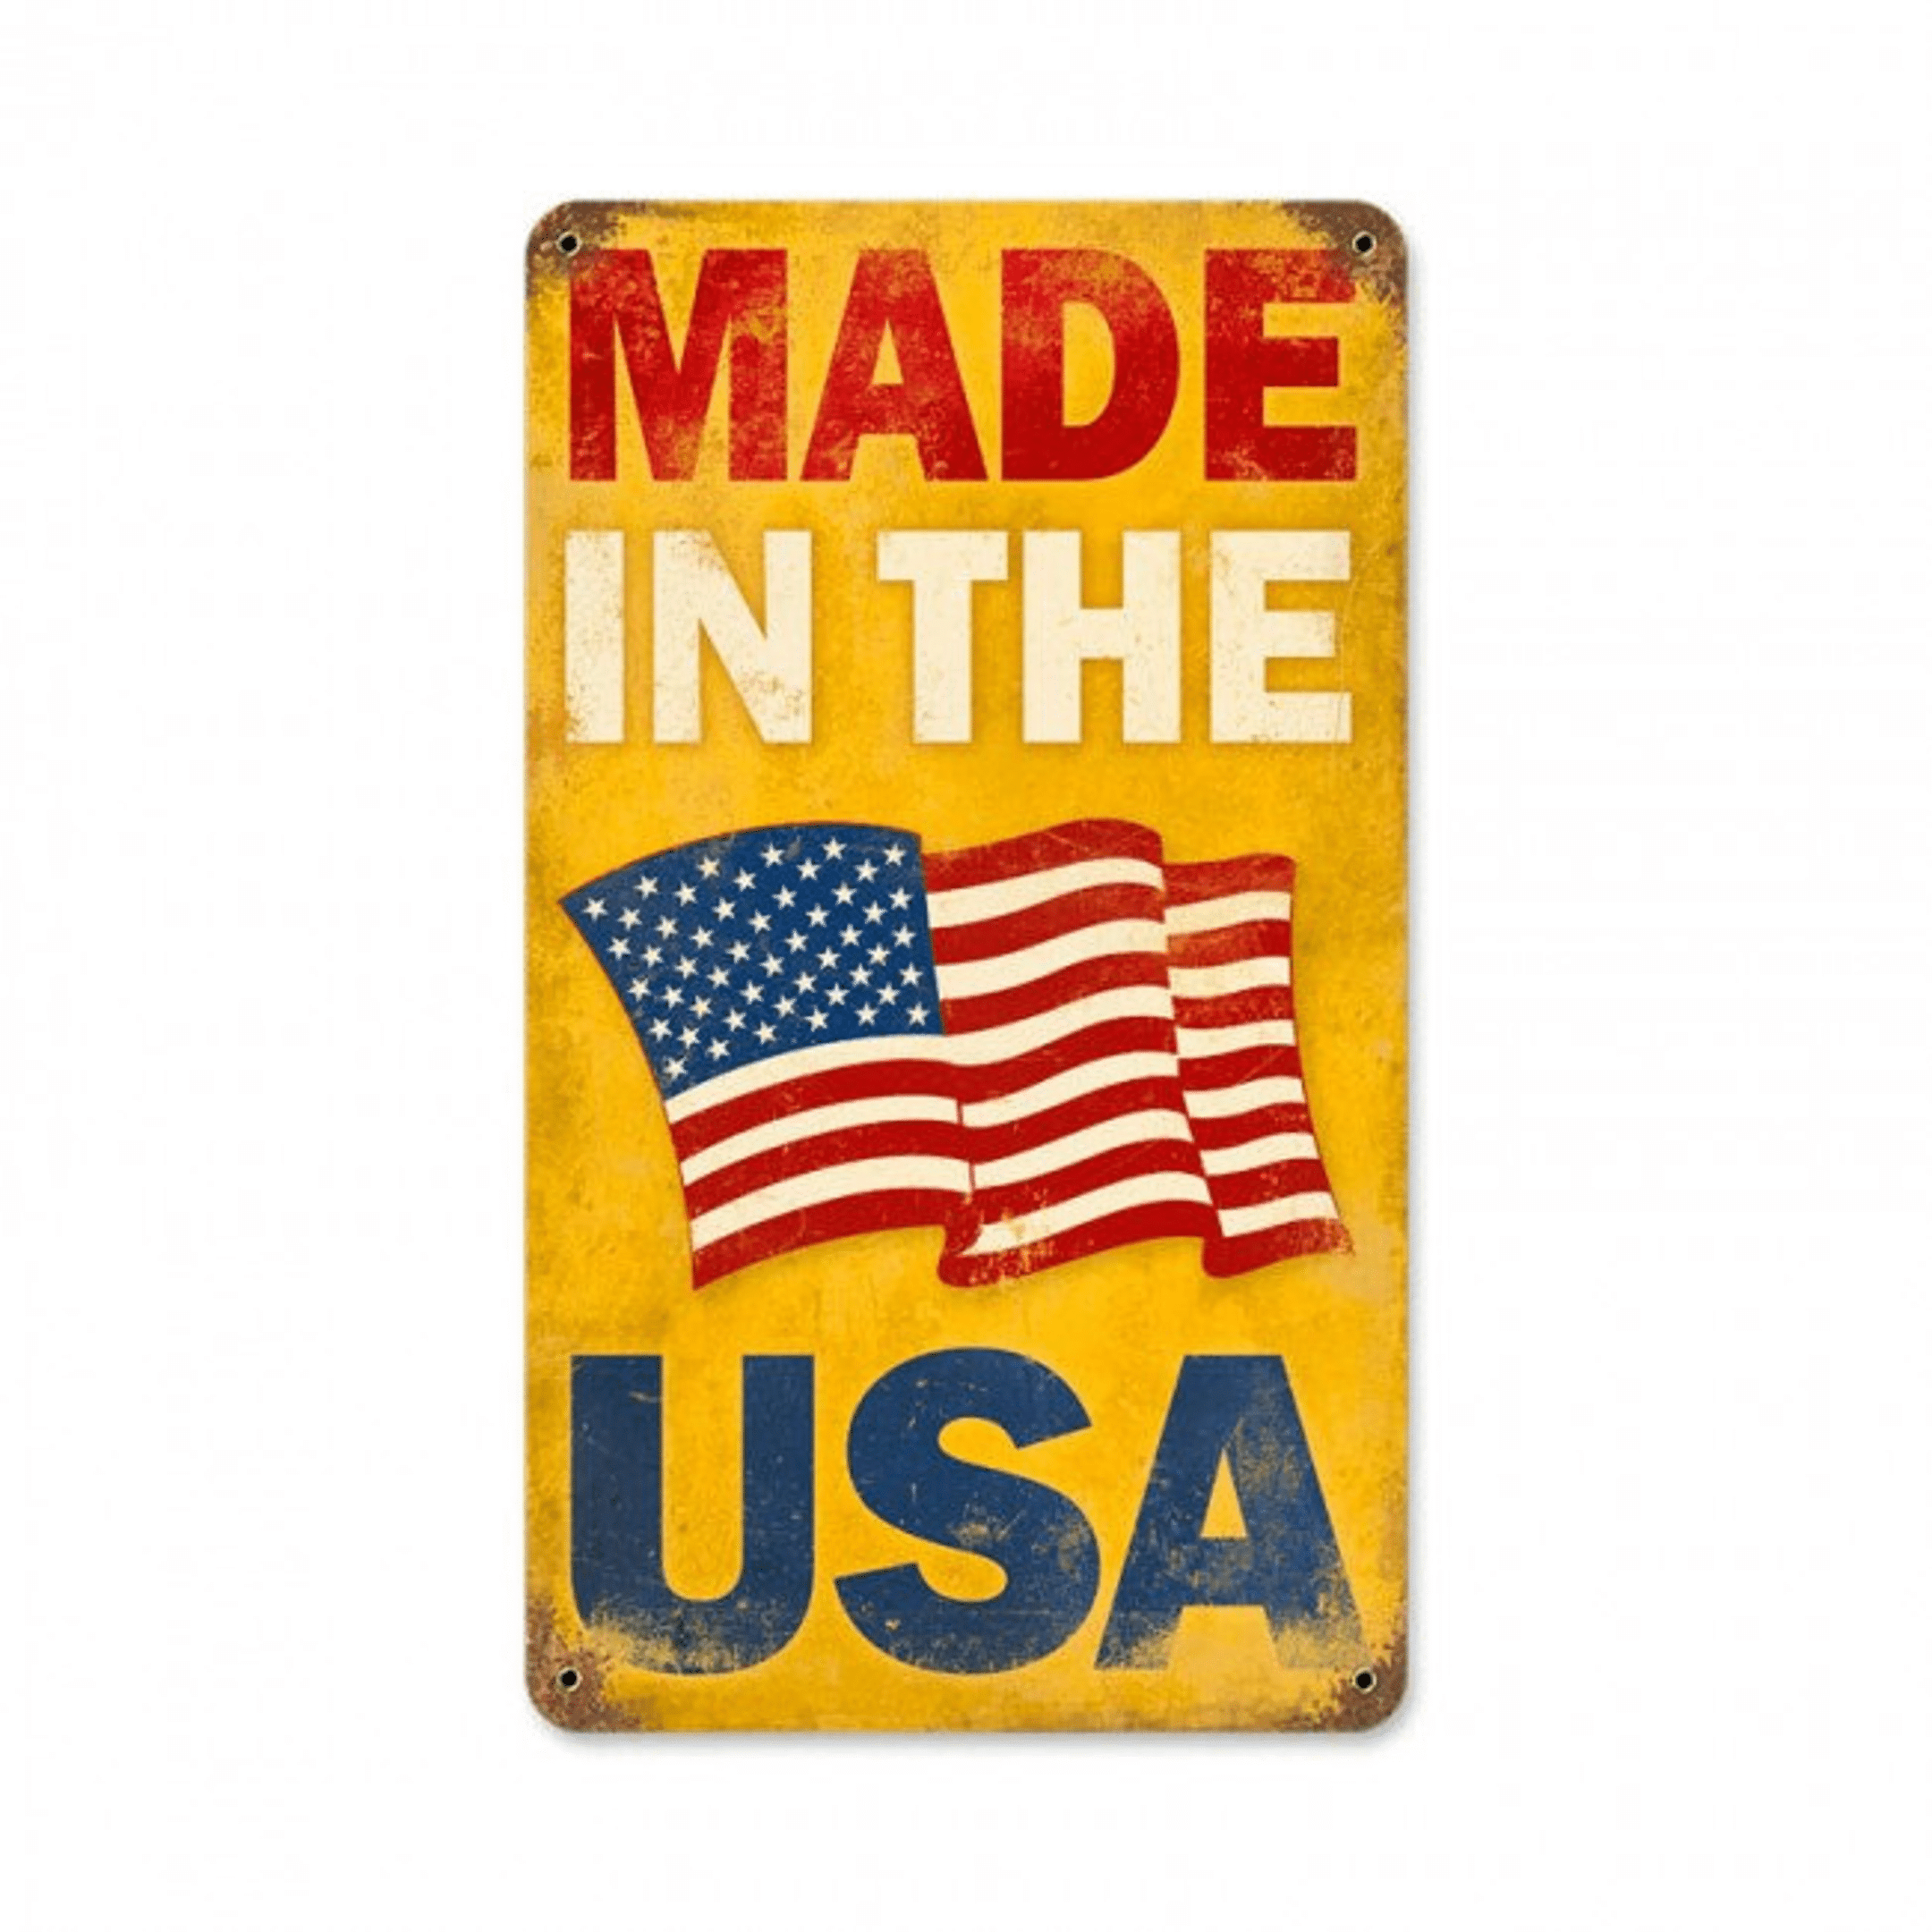 See America Welcome To Montana Metal Sign 3 Sizes vintage style United States Travel Bureau retro country advertising art wall decor RG